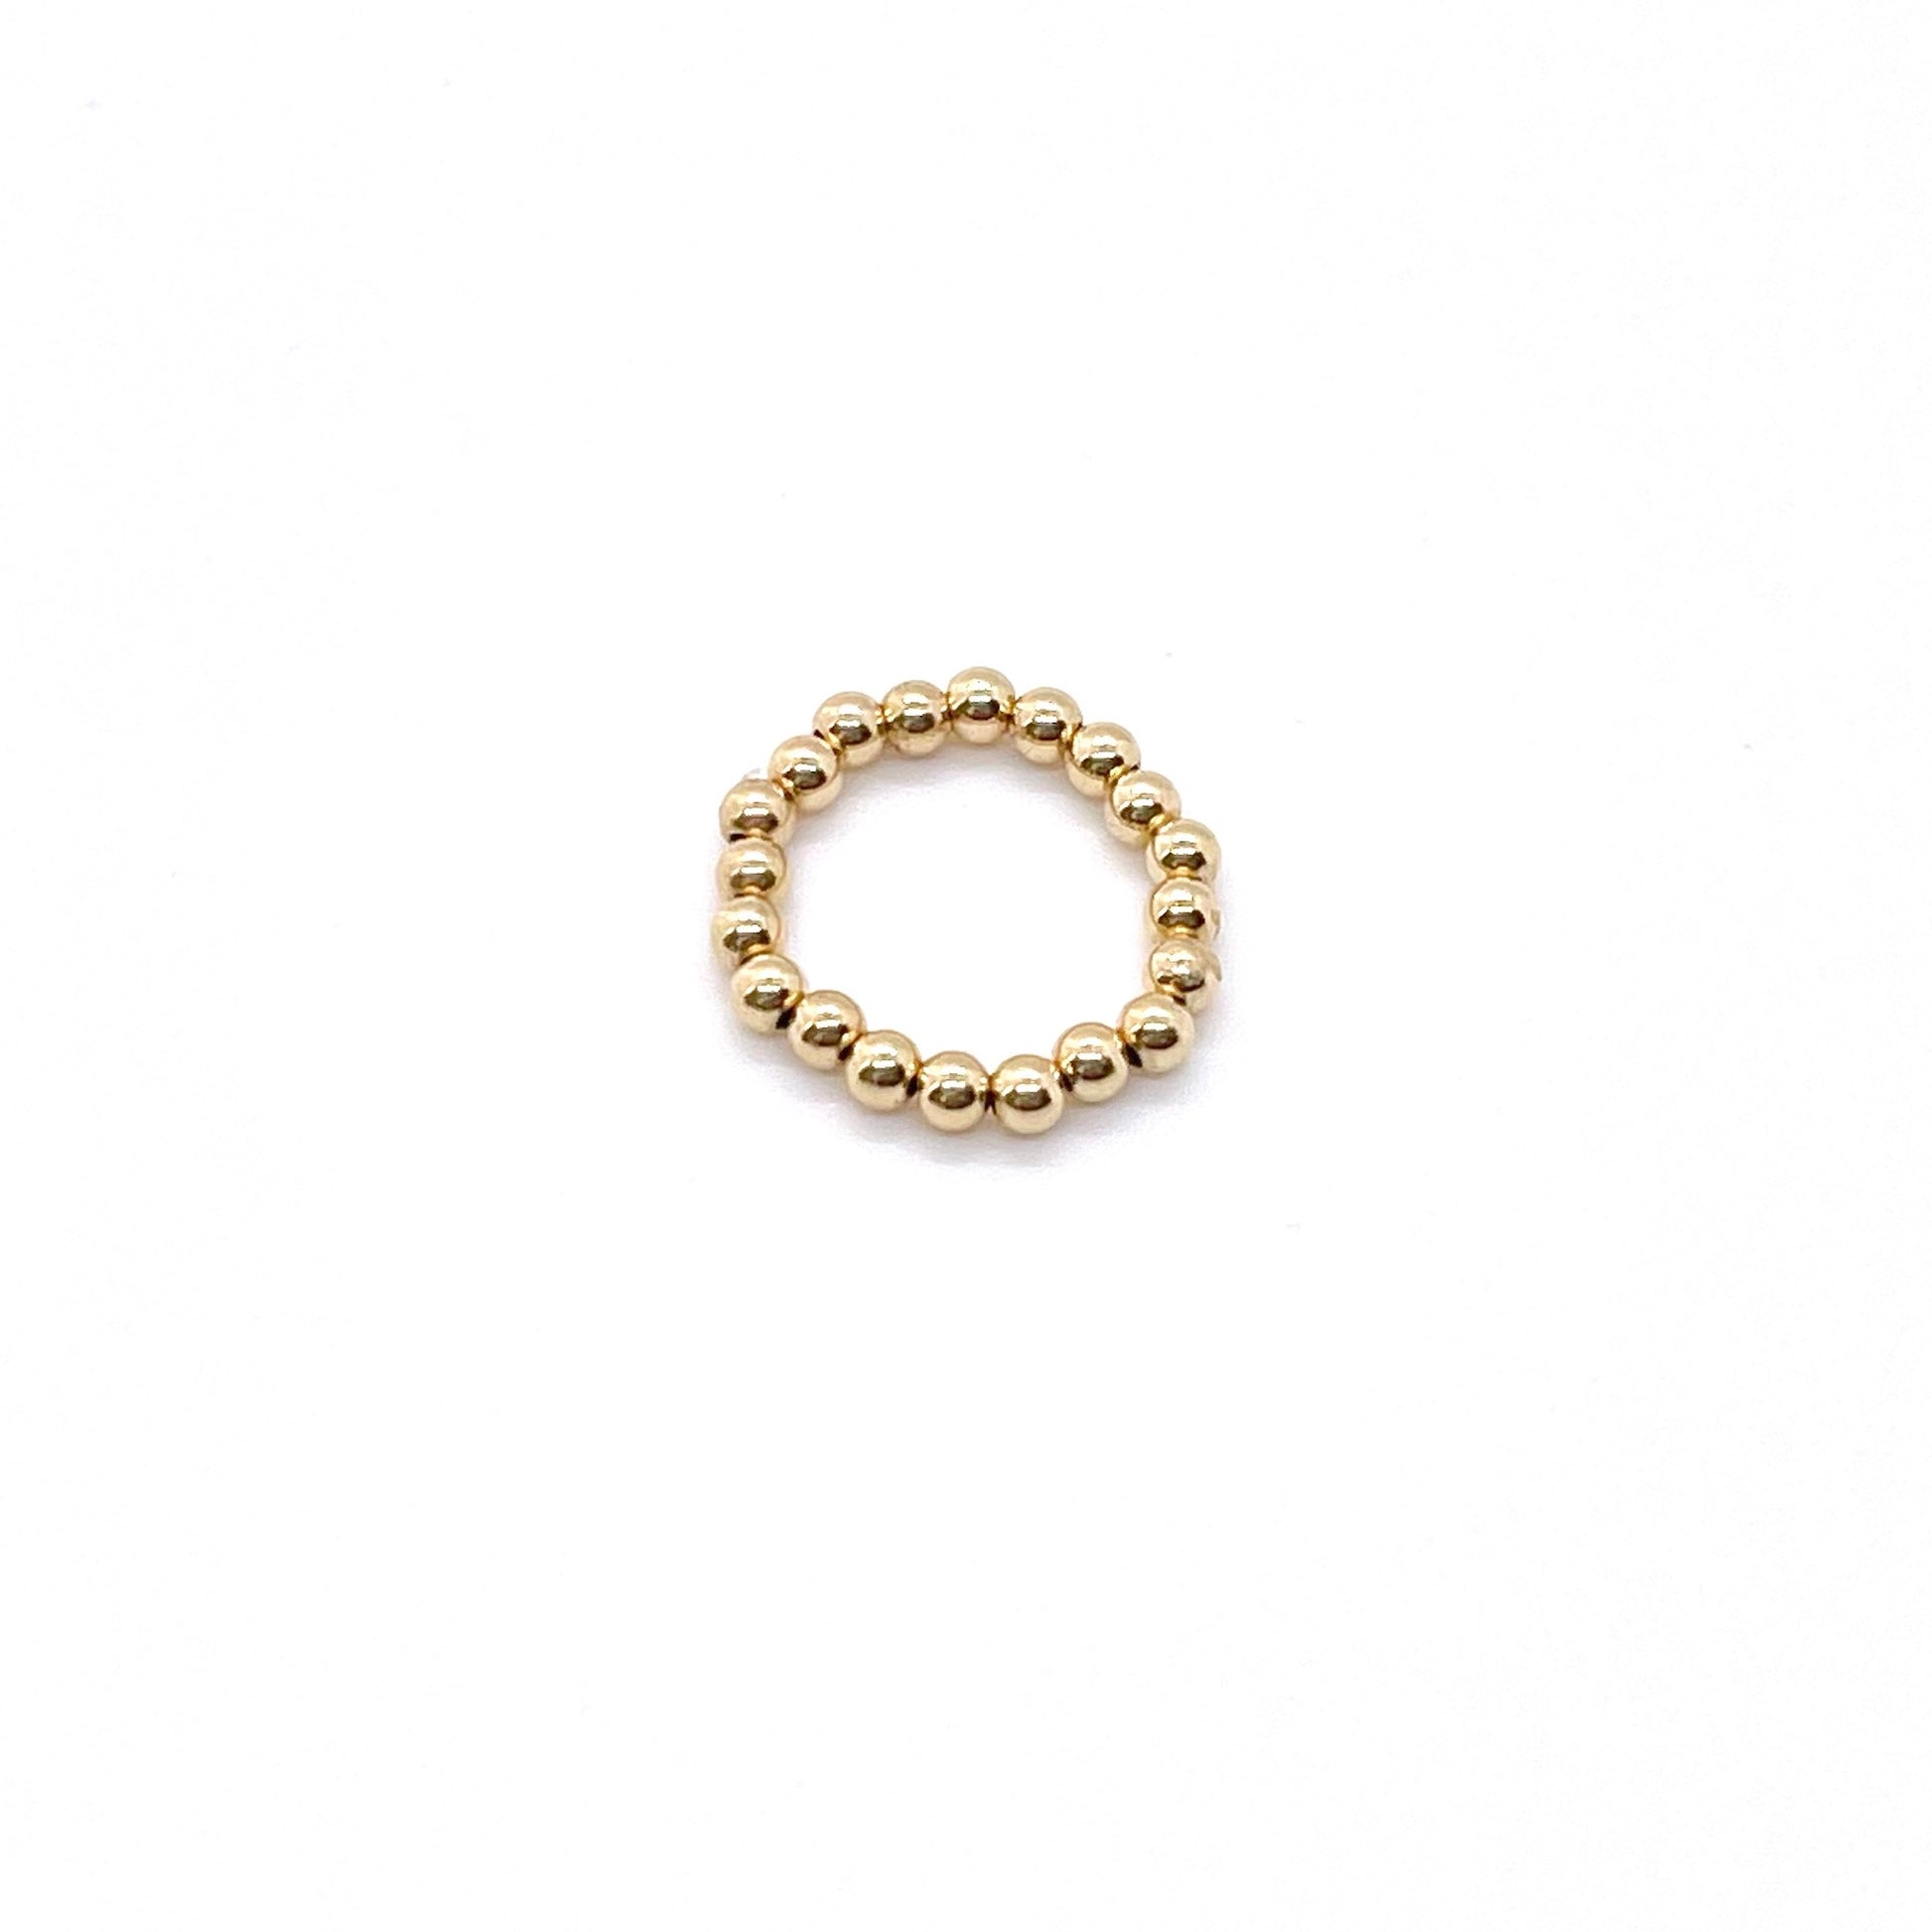 Gold stretch ring with 3mm 14K gold filled waterproof beads on elastic stretch cord.